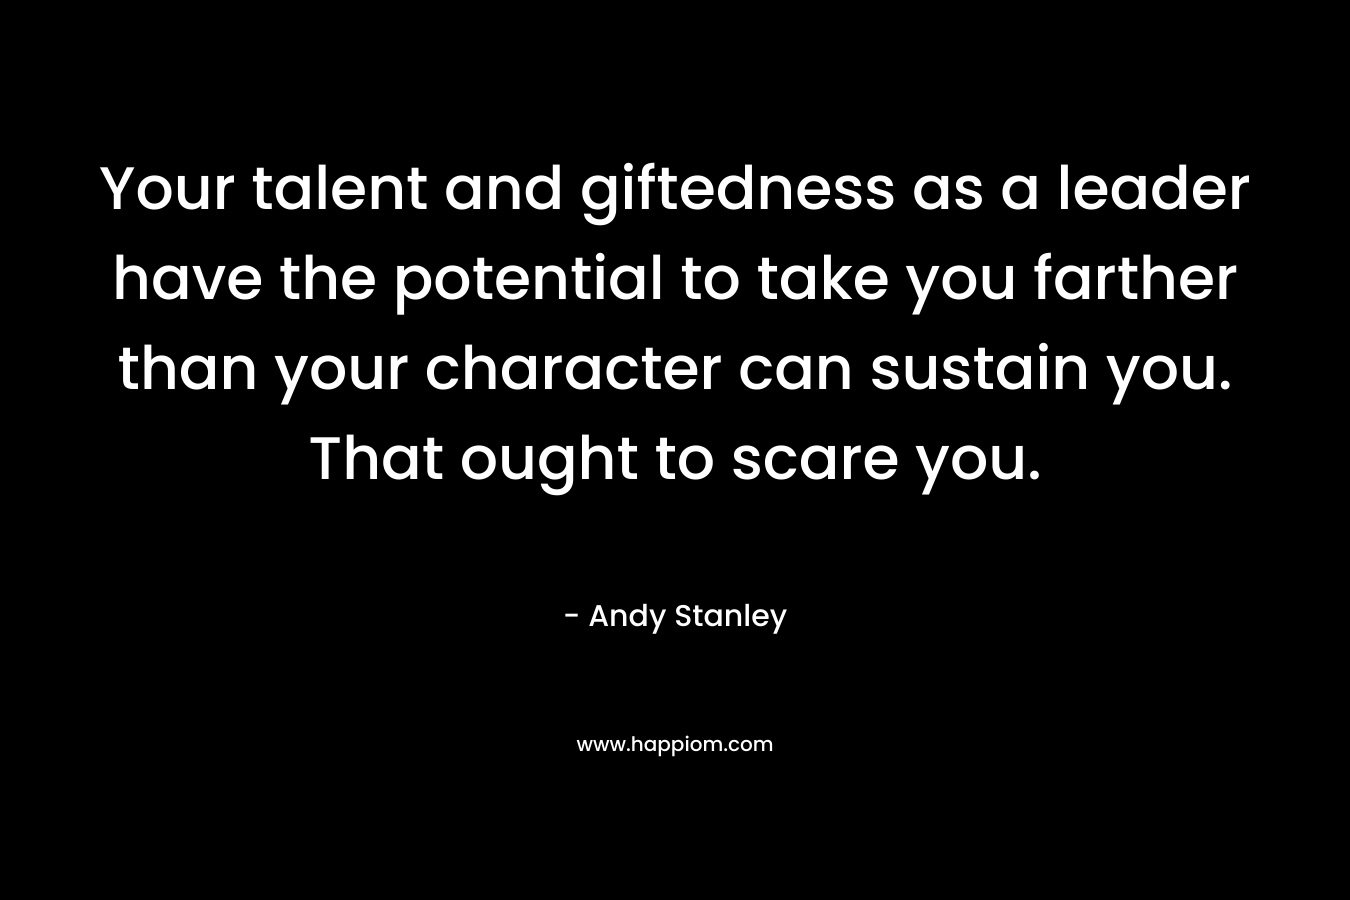 Your talent and giftedness as a leader have the potential to take you farther than your character can sustain you. That ought to scare you. – Andy Stanley